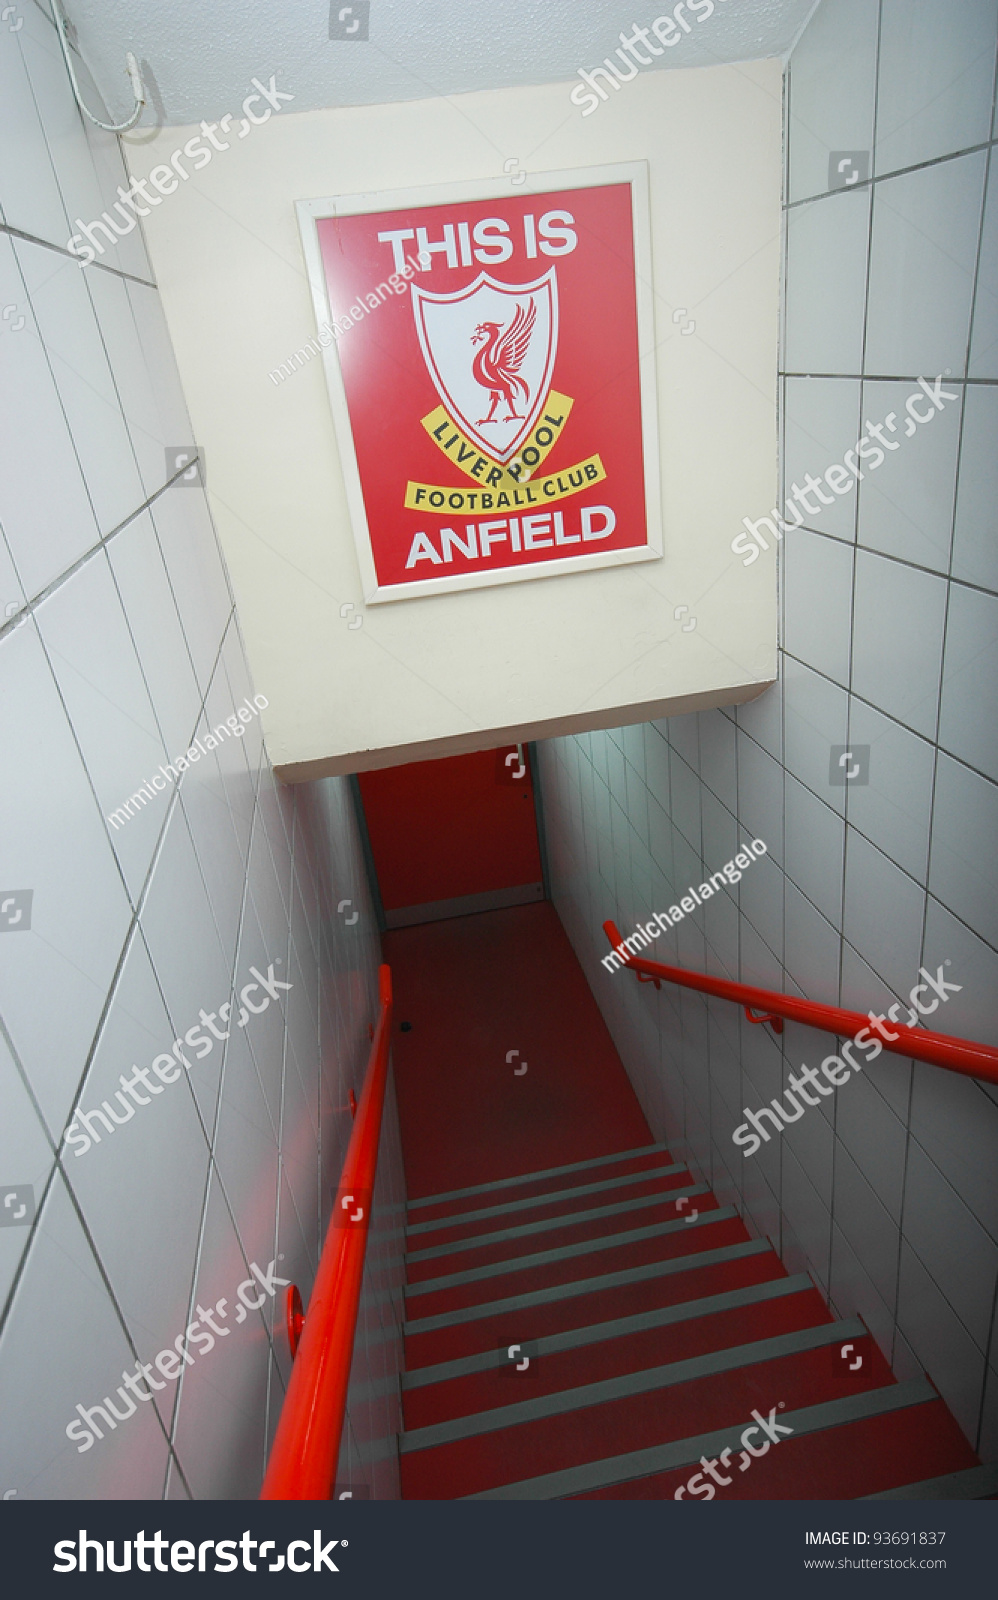 Liverpool England June 5 This Anfield Stock Photo Edit Now